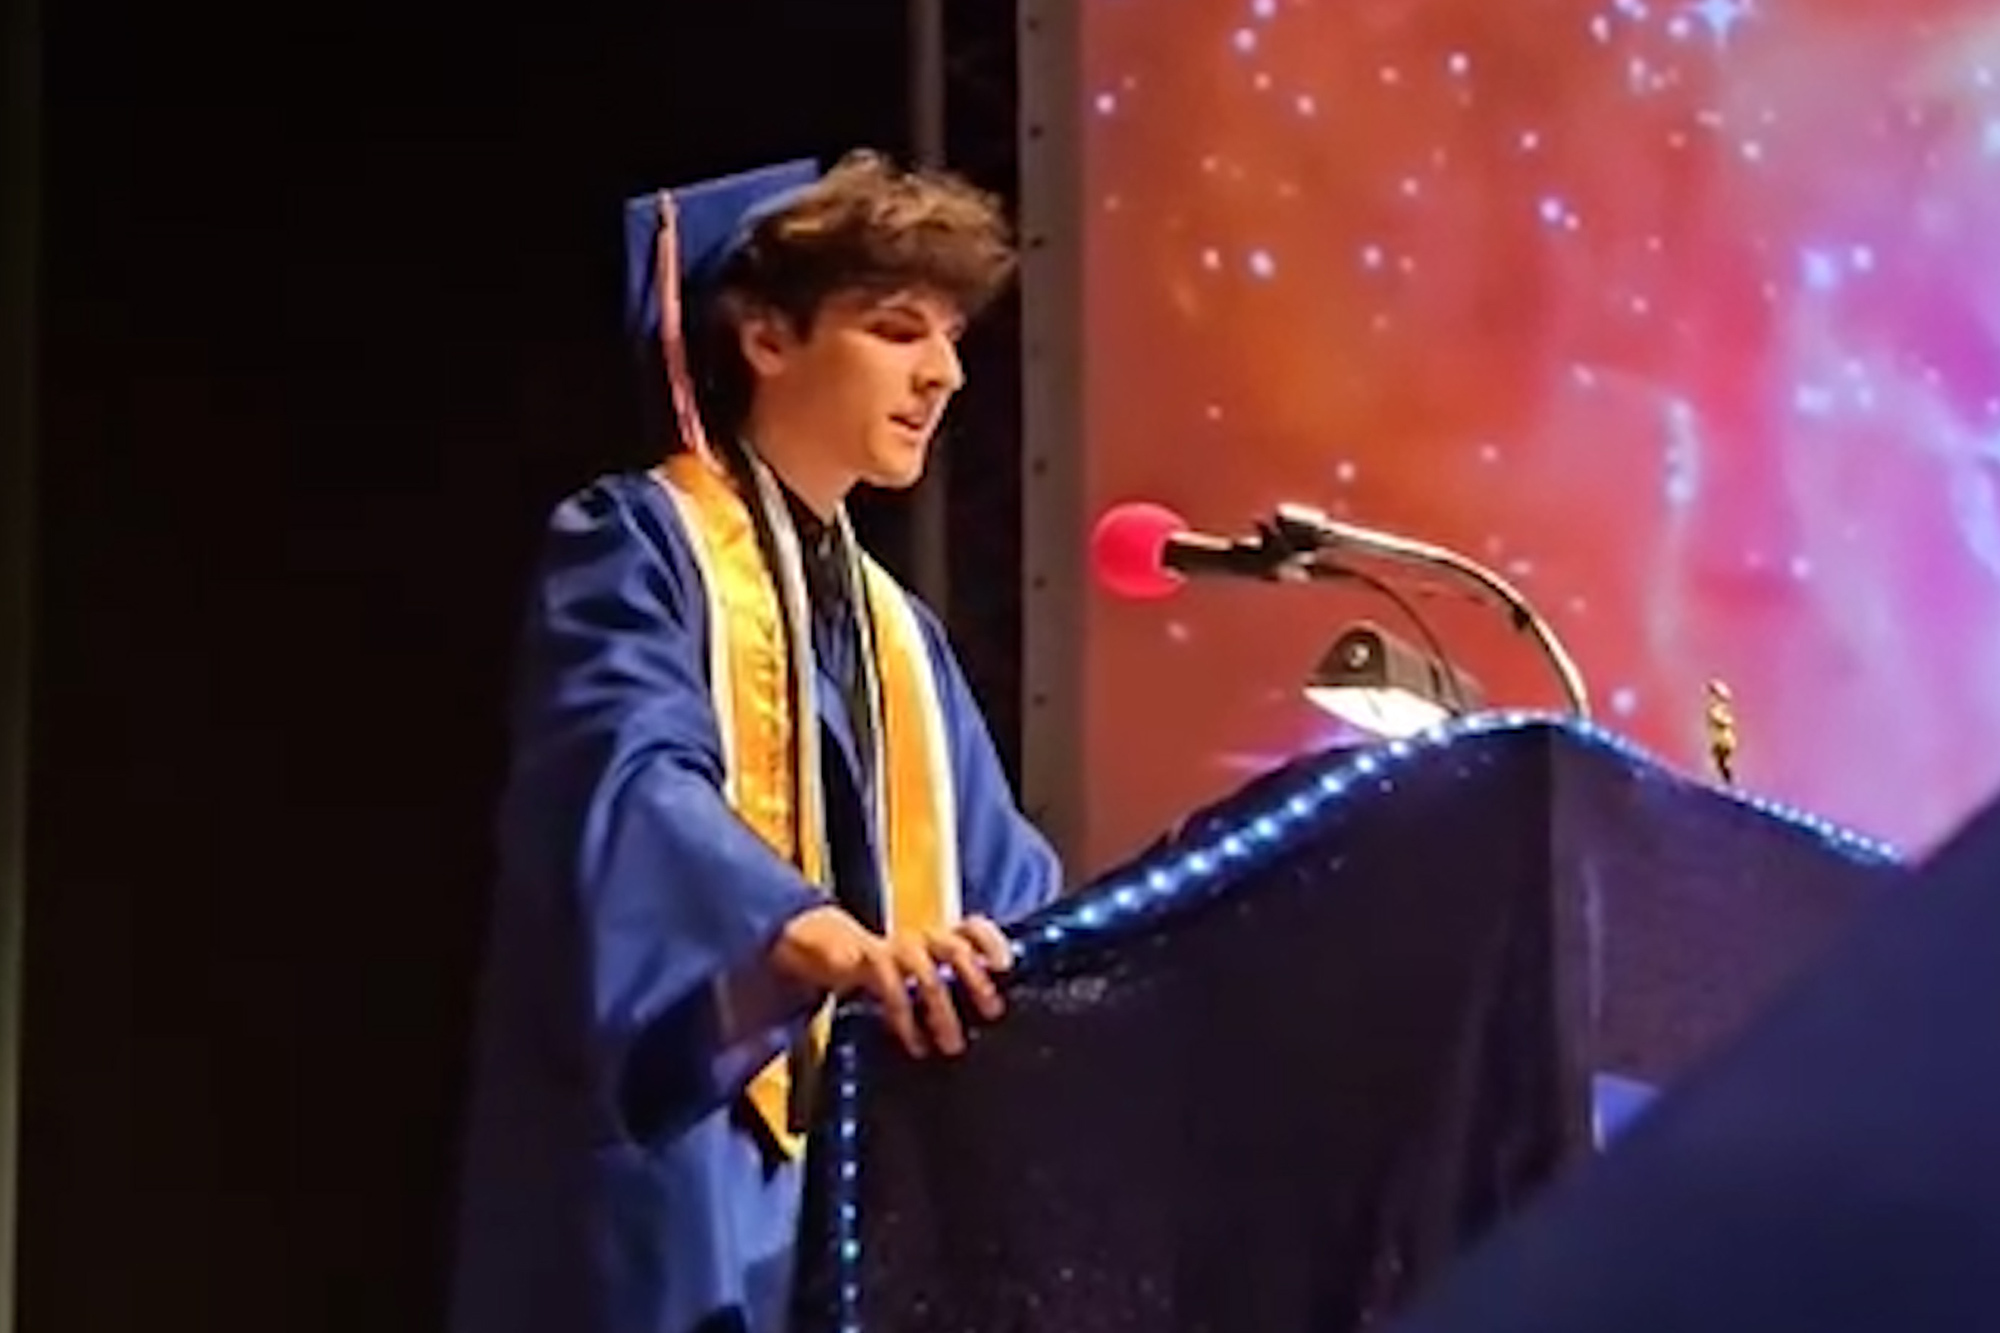 Texas high school valedictorian delivers emotional speech hours after dad’s funeral